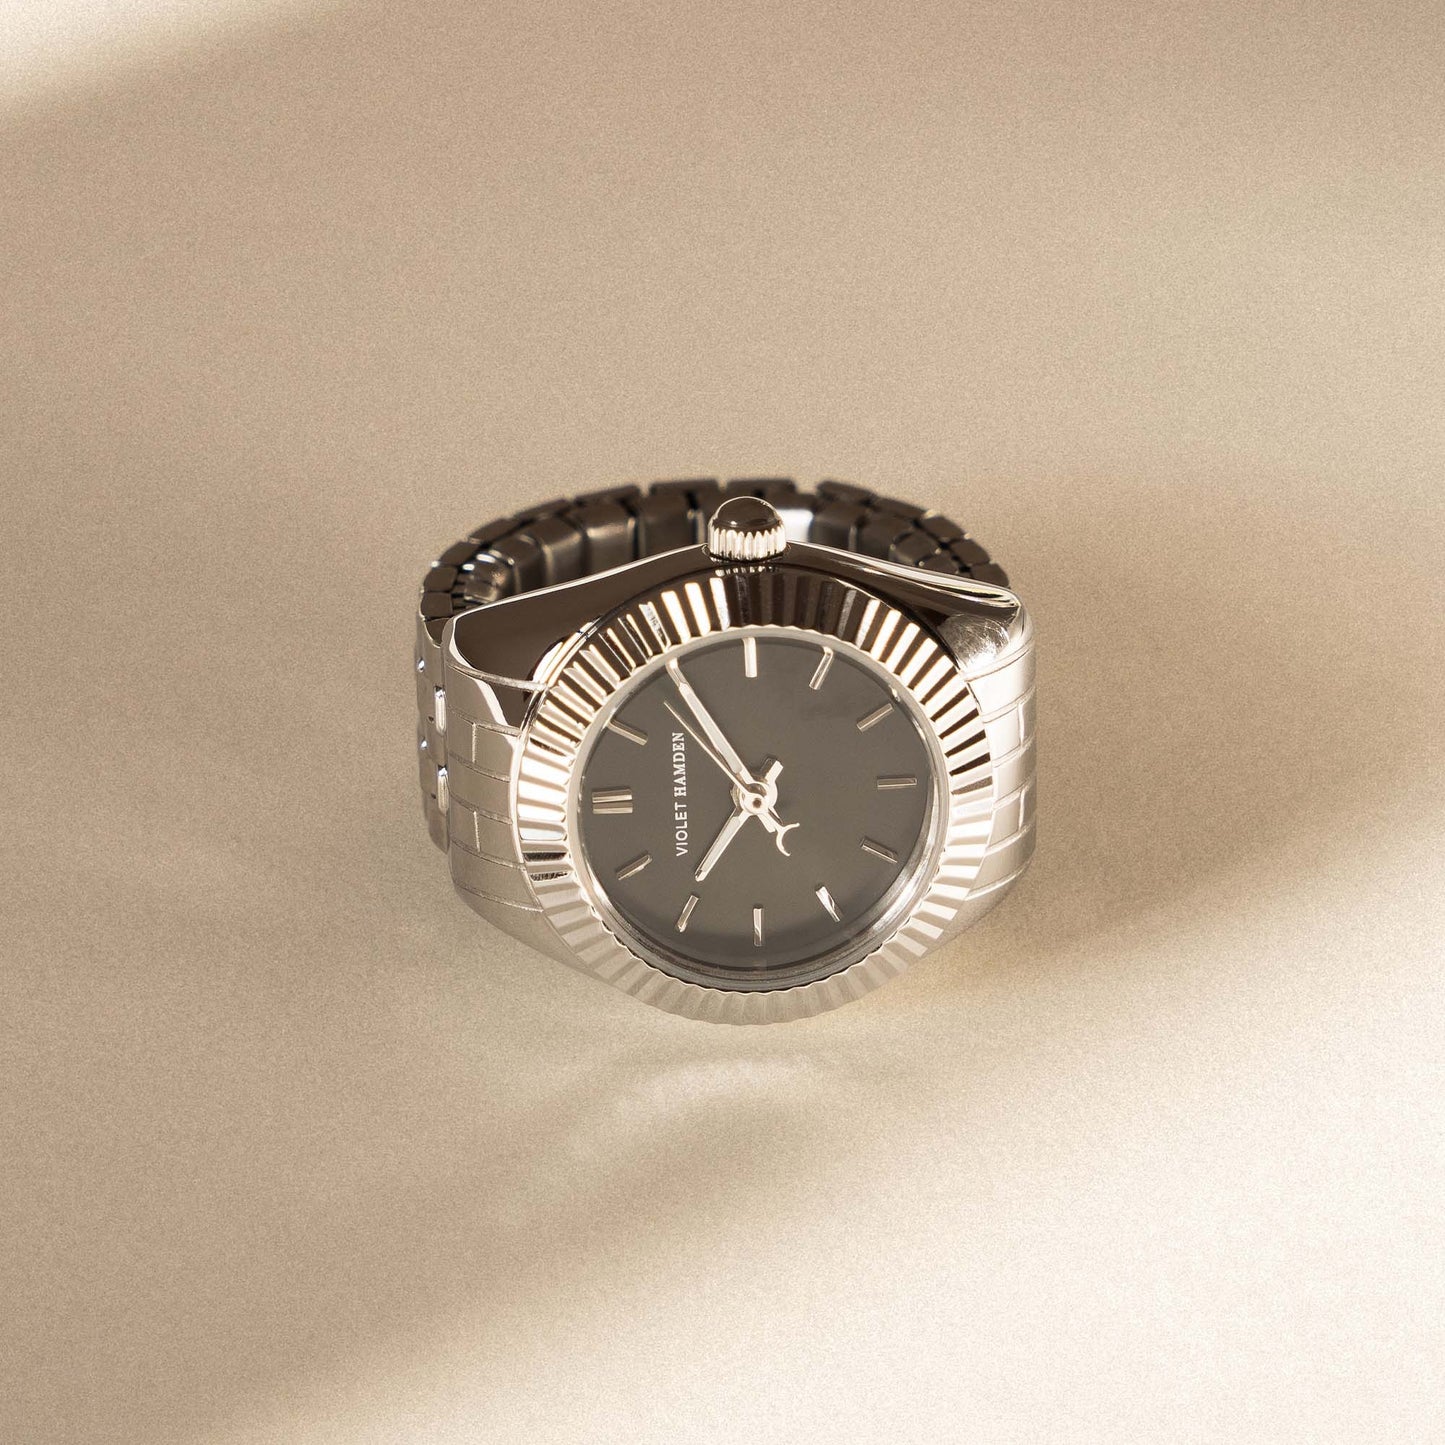 Sunrise silver coloured ring watch